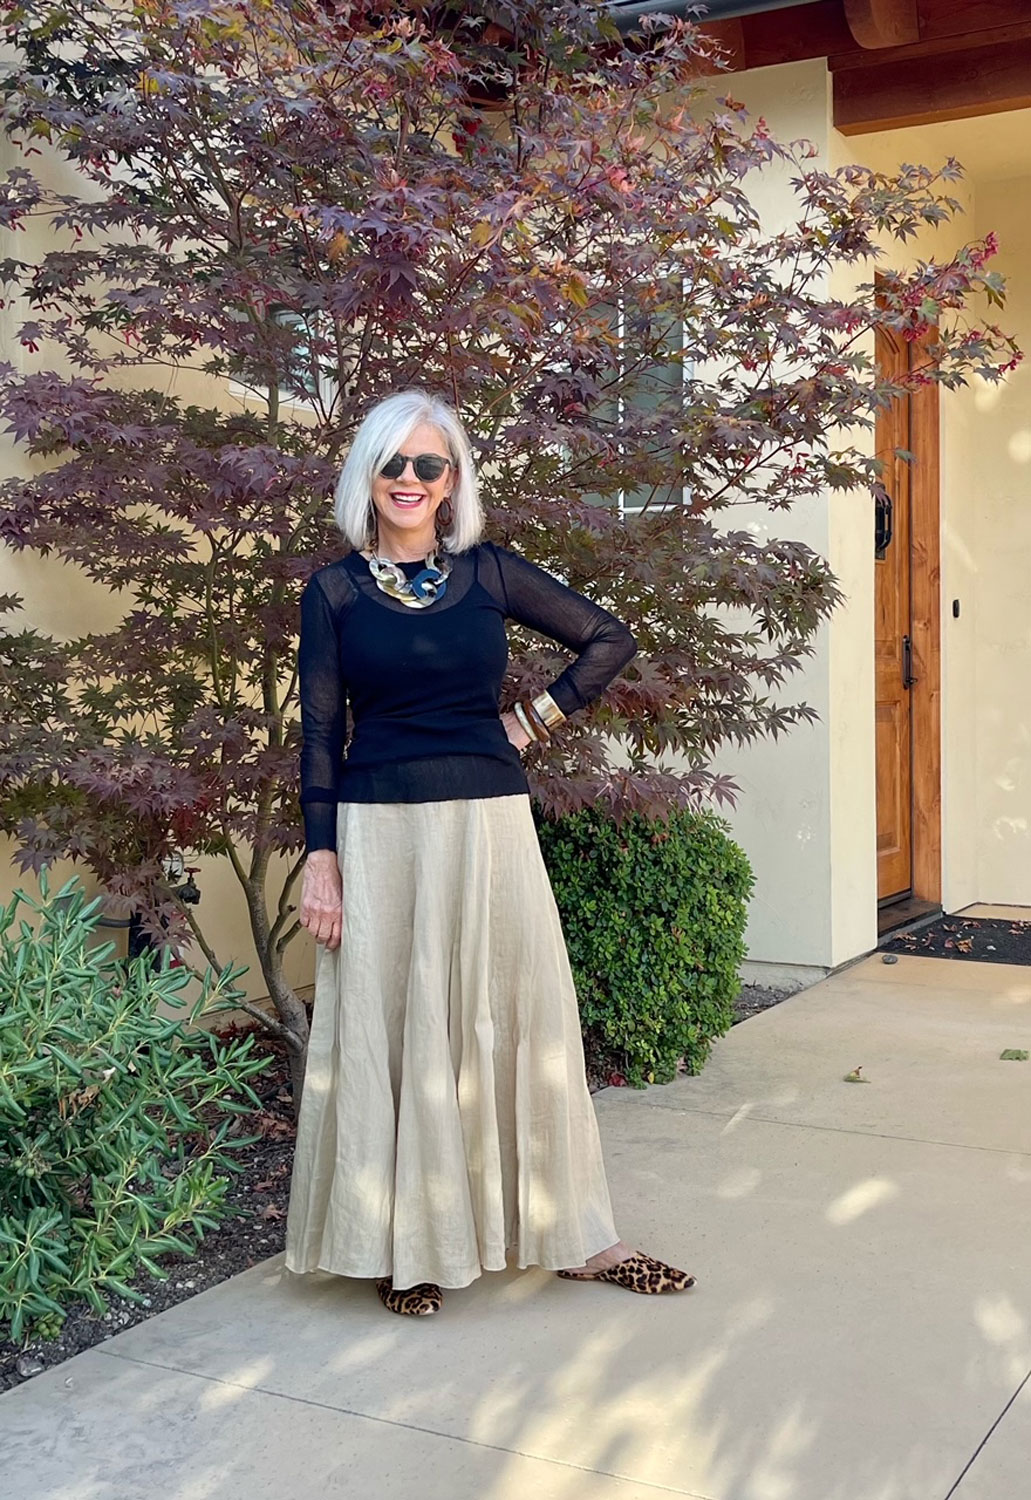 over 50 style blogger cindy hattersley in linen lily skirt and Cynthia Ashby mesh tee